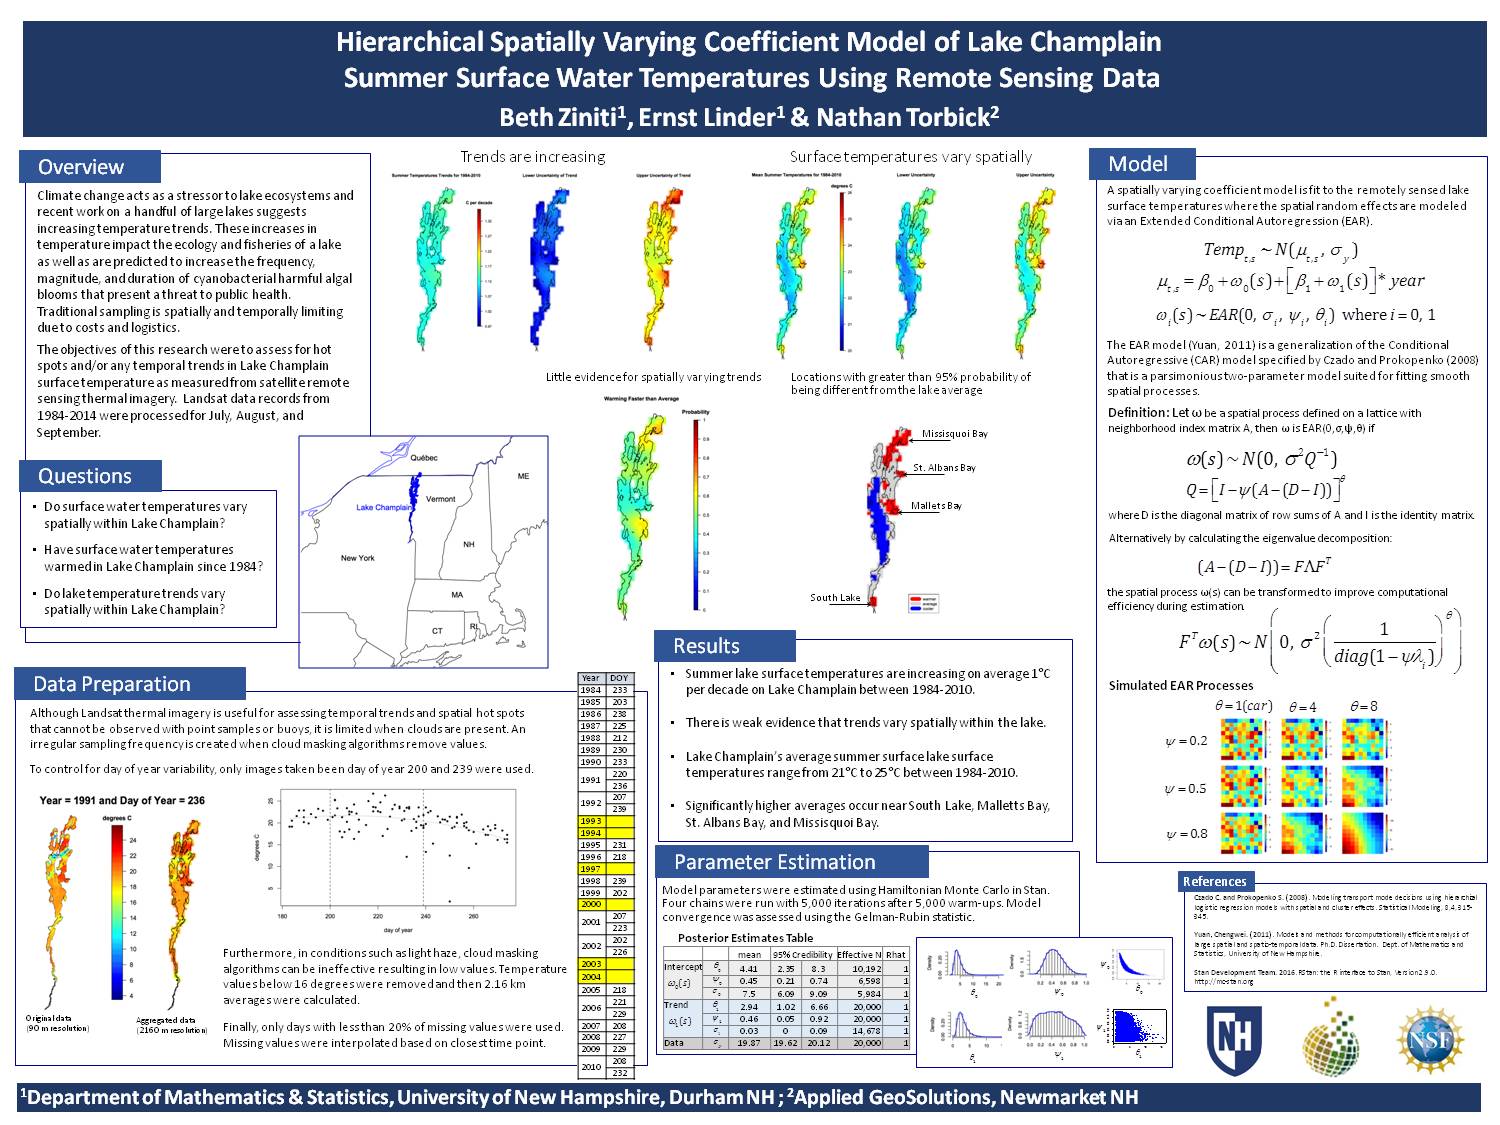 Hierarchical Spatially Varying Coefficient Model Of Lake Champlain Summer Surface Water Temperatures Using Remote Sensing Data by elo4